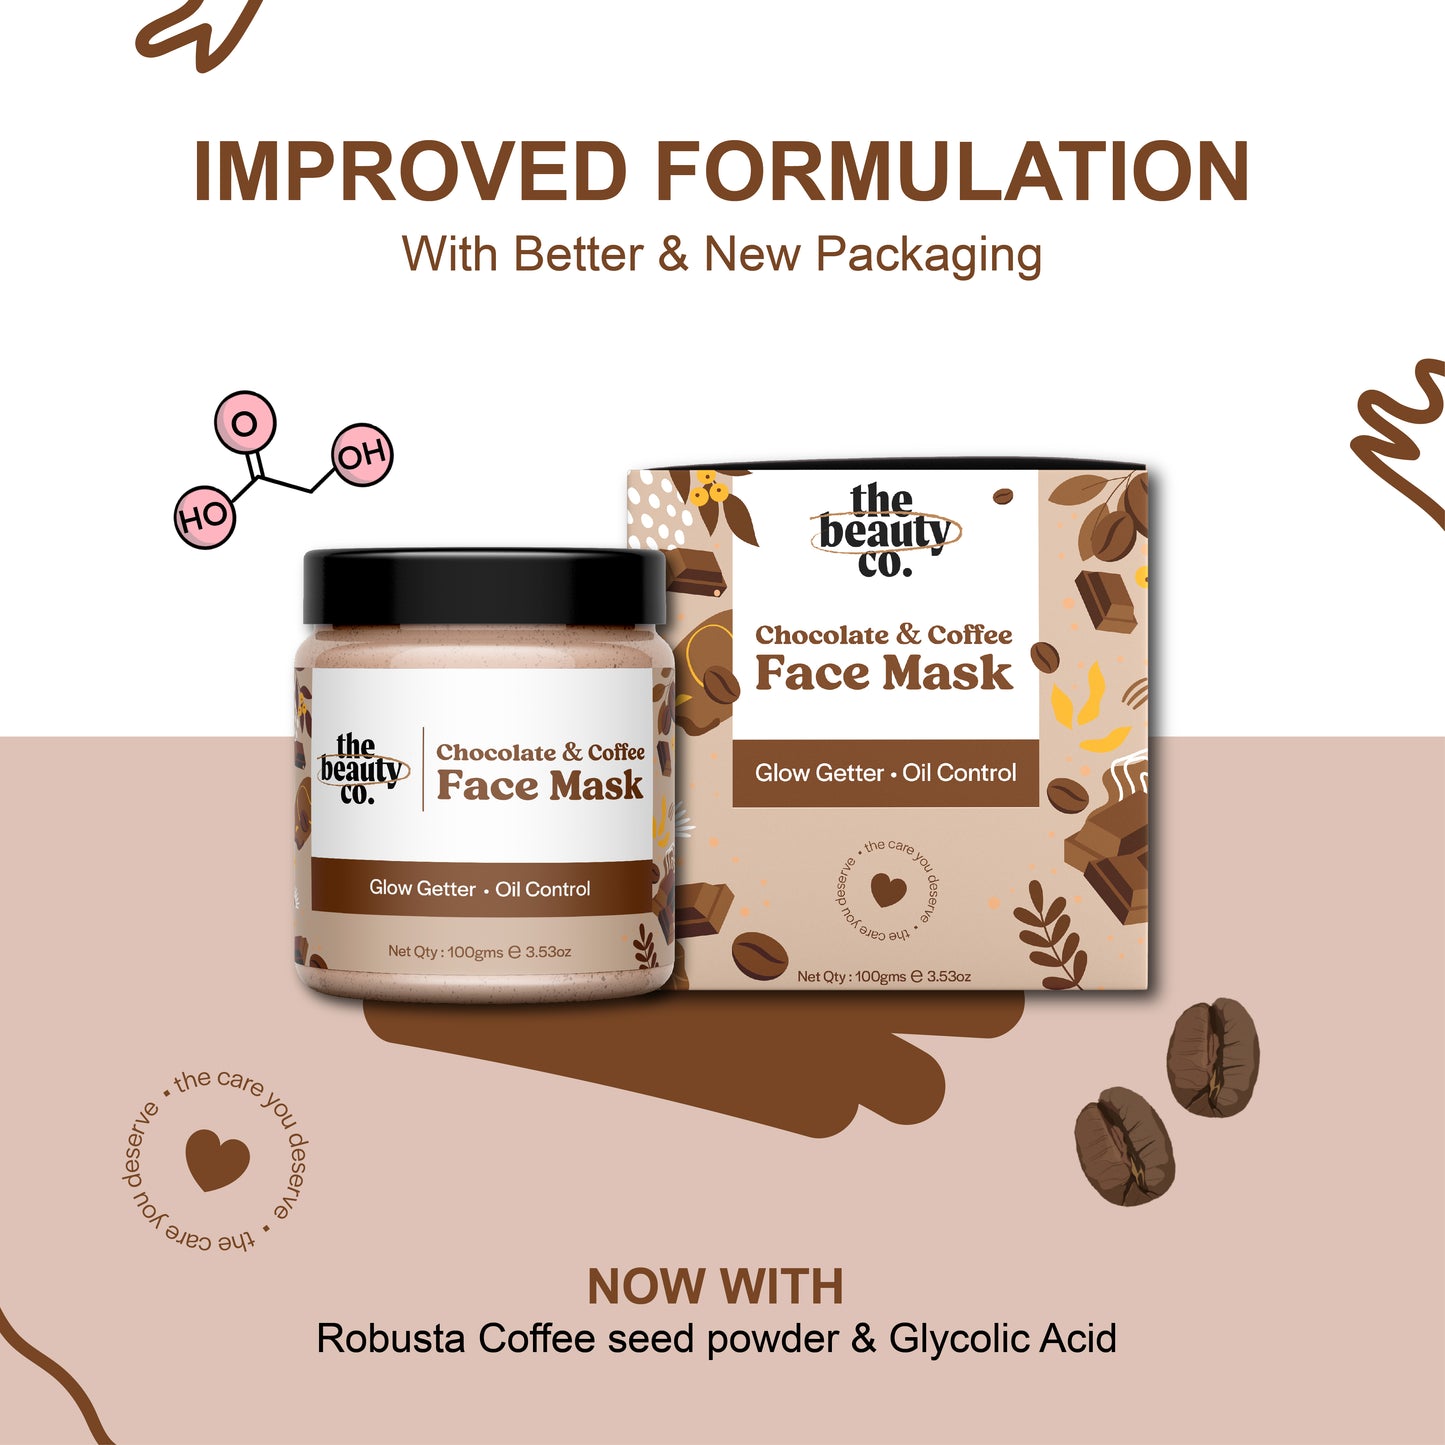 Chocolate & Coffee Face Mask With Robusta Coffee